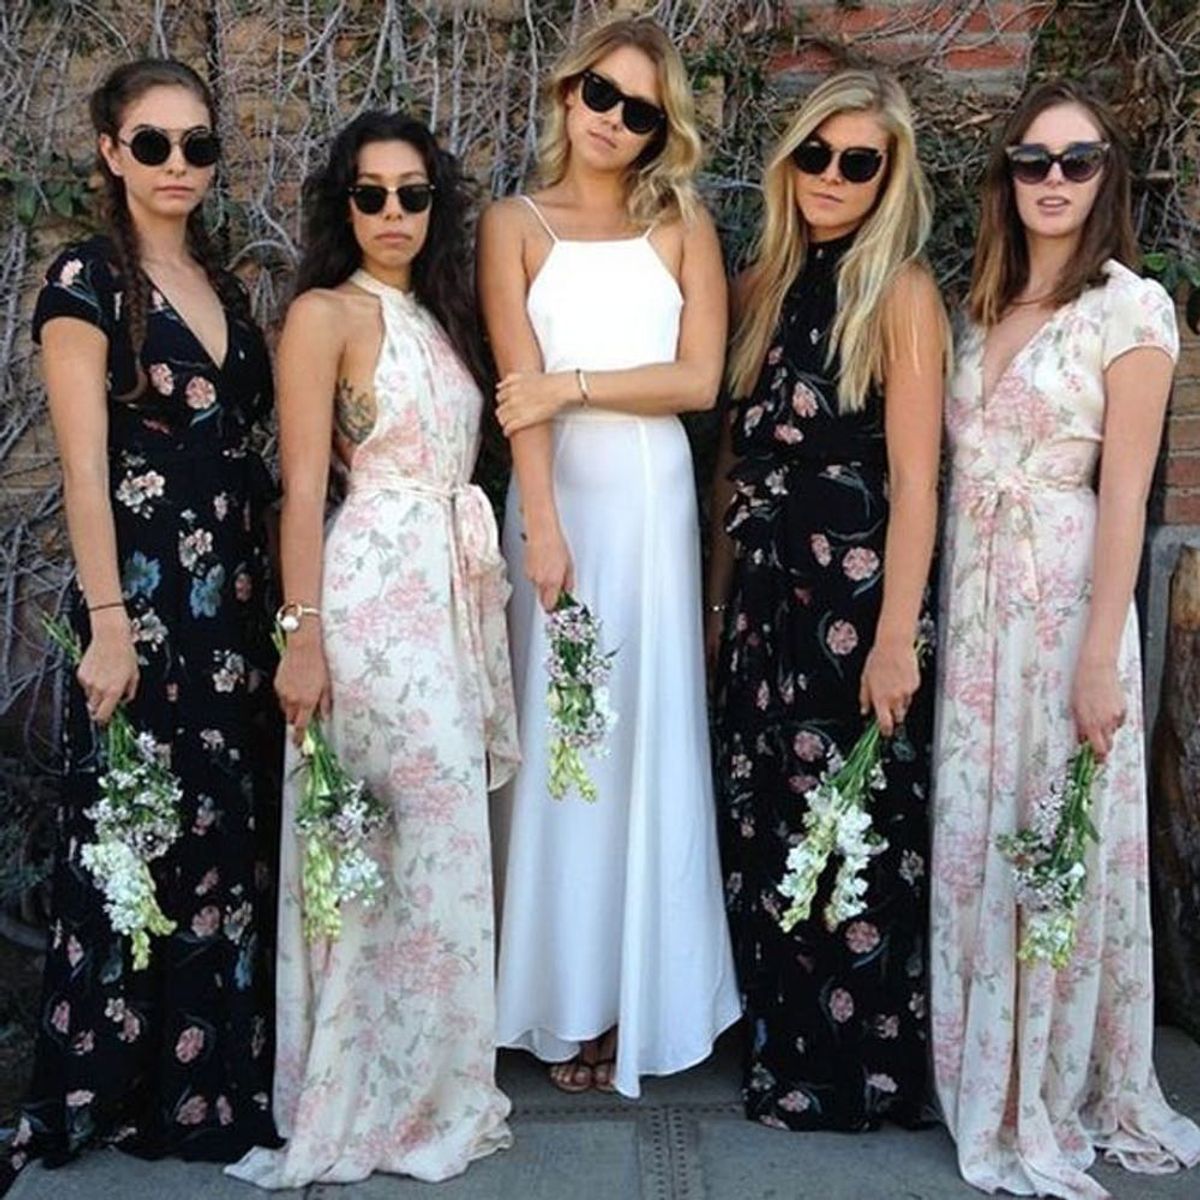 These Are the Top 2017 Wedding Trends, According to Pinterest